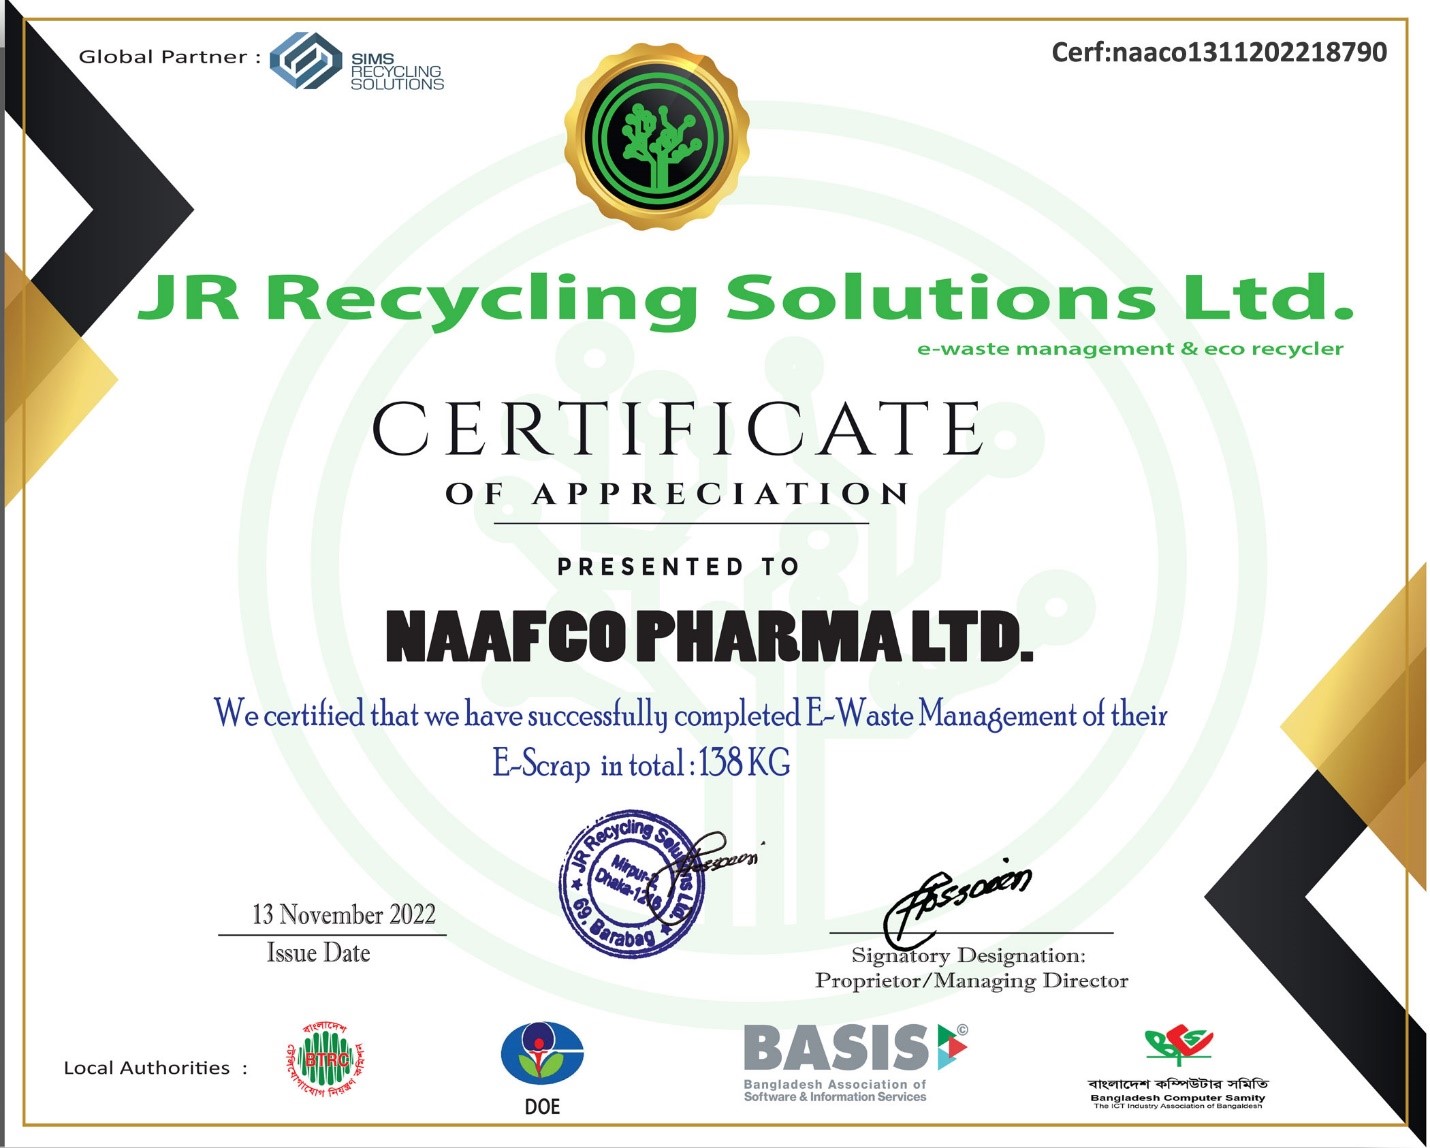 Reducing our e-waste by segregating and separating the e-scraps